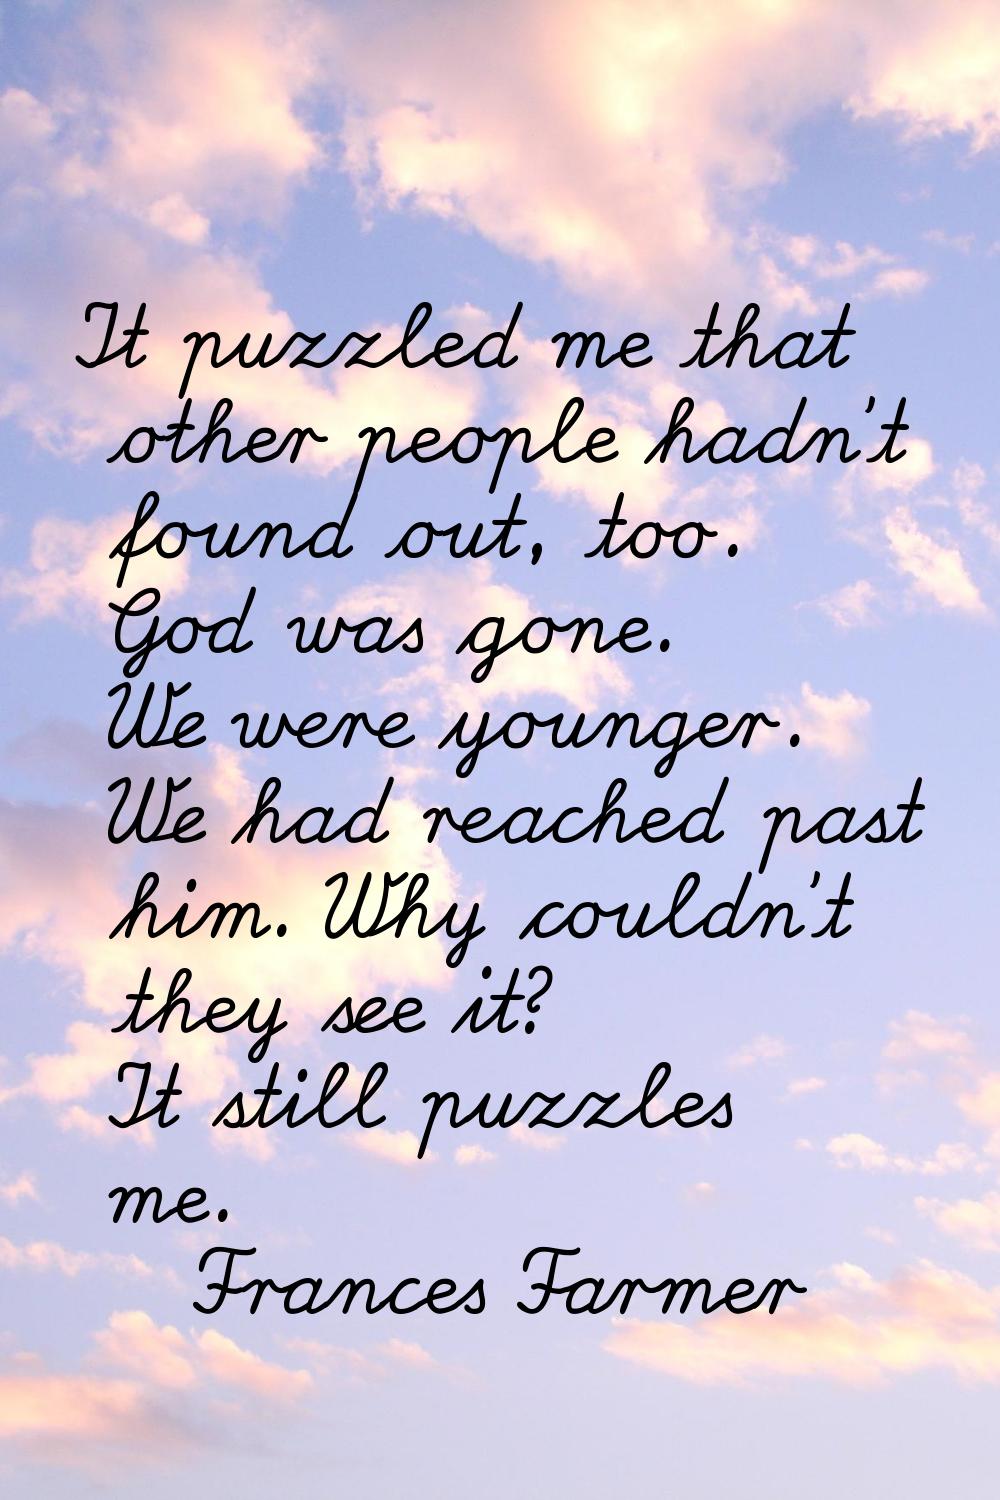 It puzzled me that other people hadn't found out, too. God was gone. We were younger. We had reache